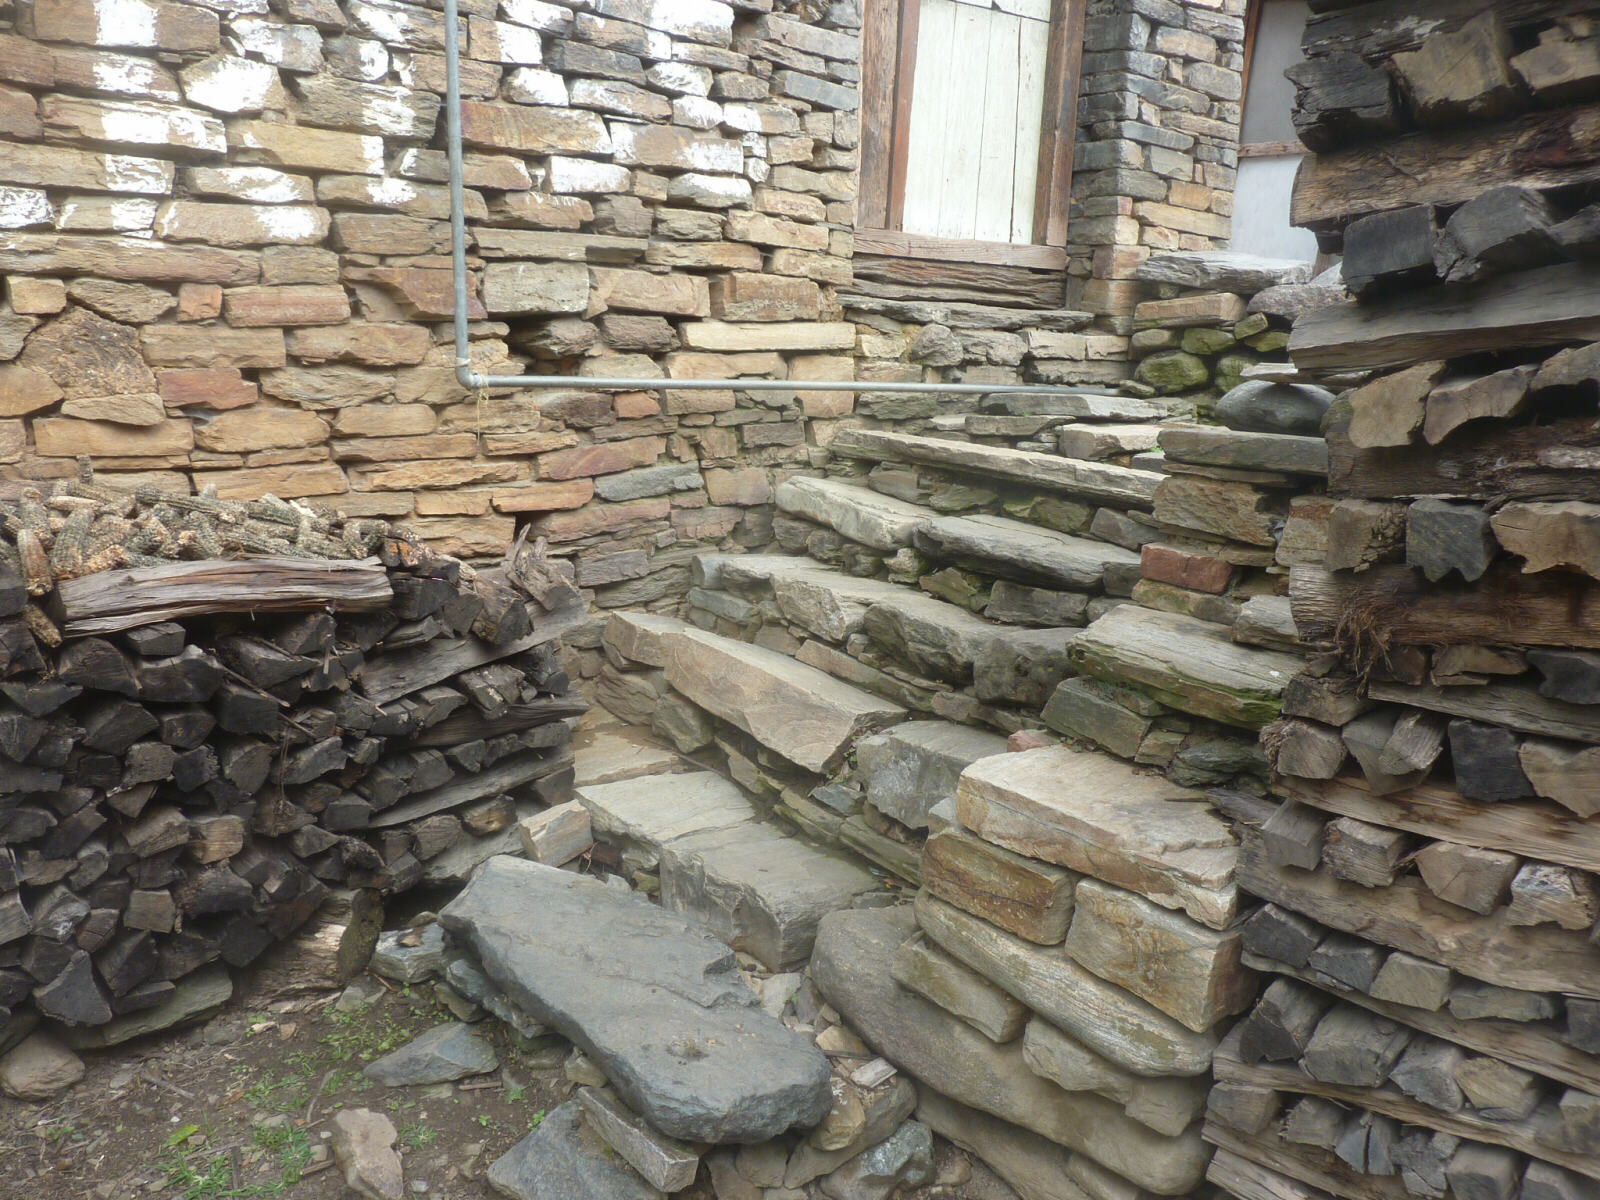 Old stone steps up to a house in Dirang, Arunachal Pradesh